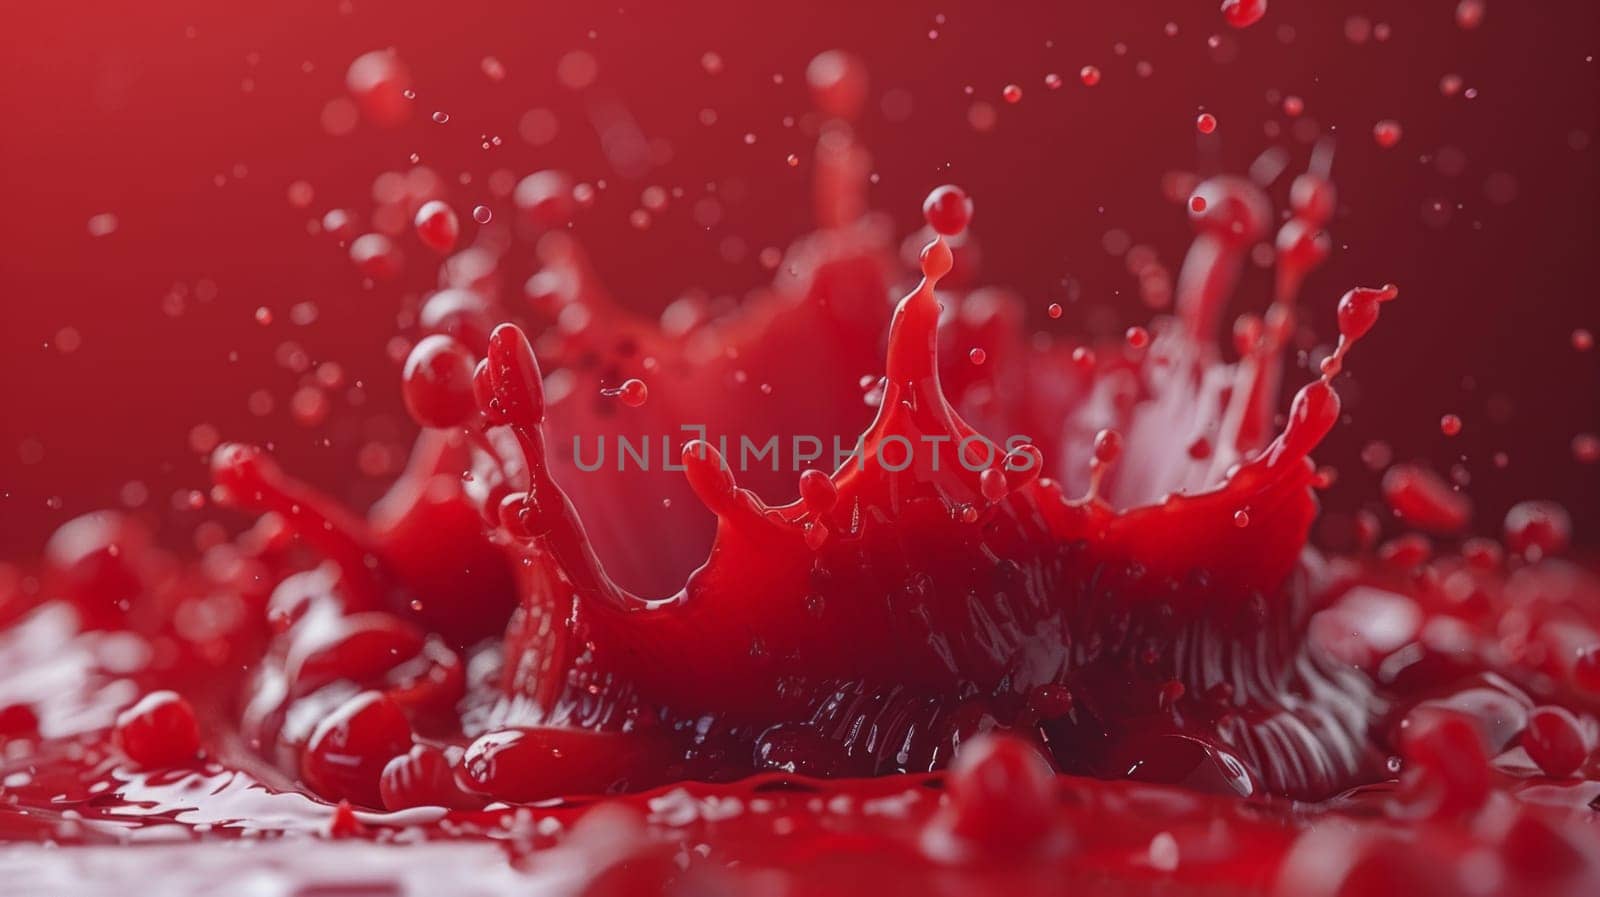 A vivid red liquid cascades and dances gracefully on a scarlet surface, creating a mesmerizing display of color and movement by but_photo